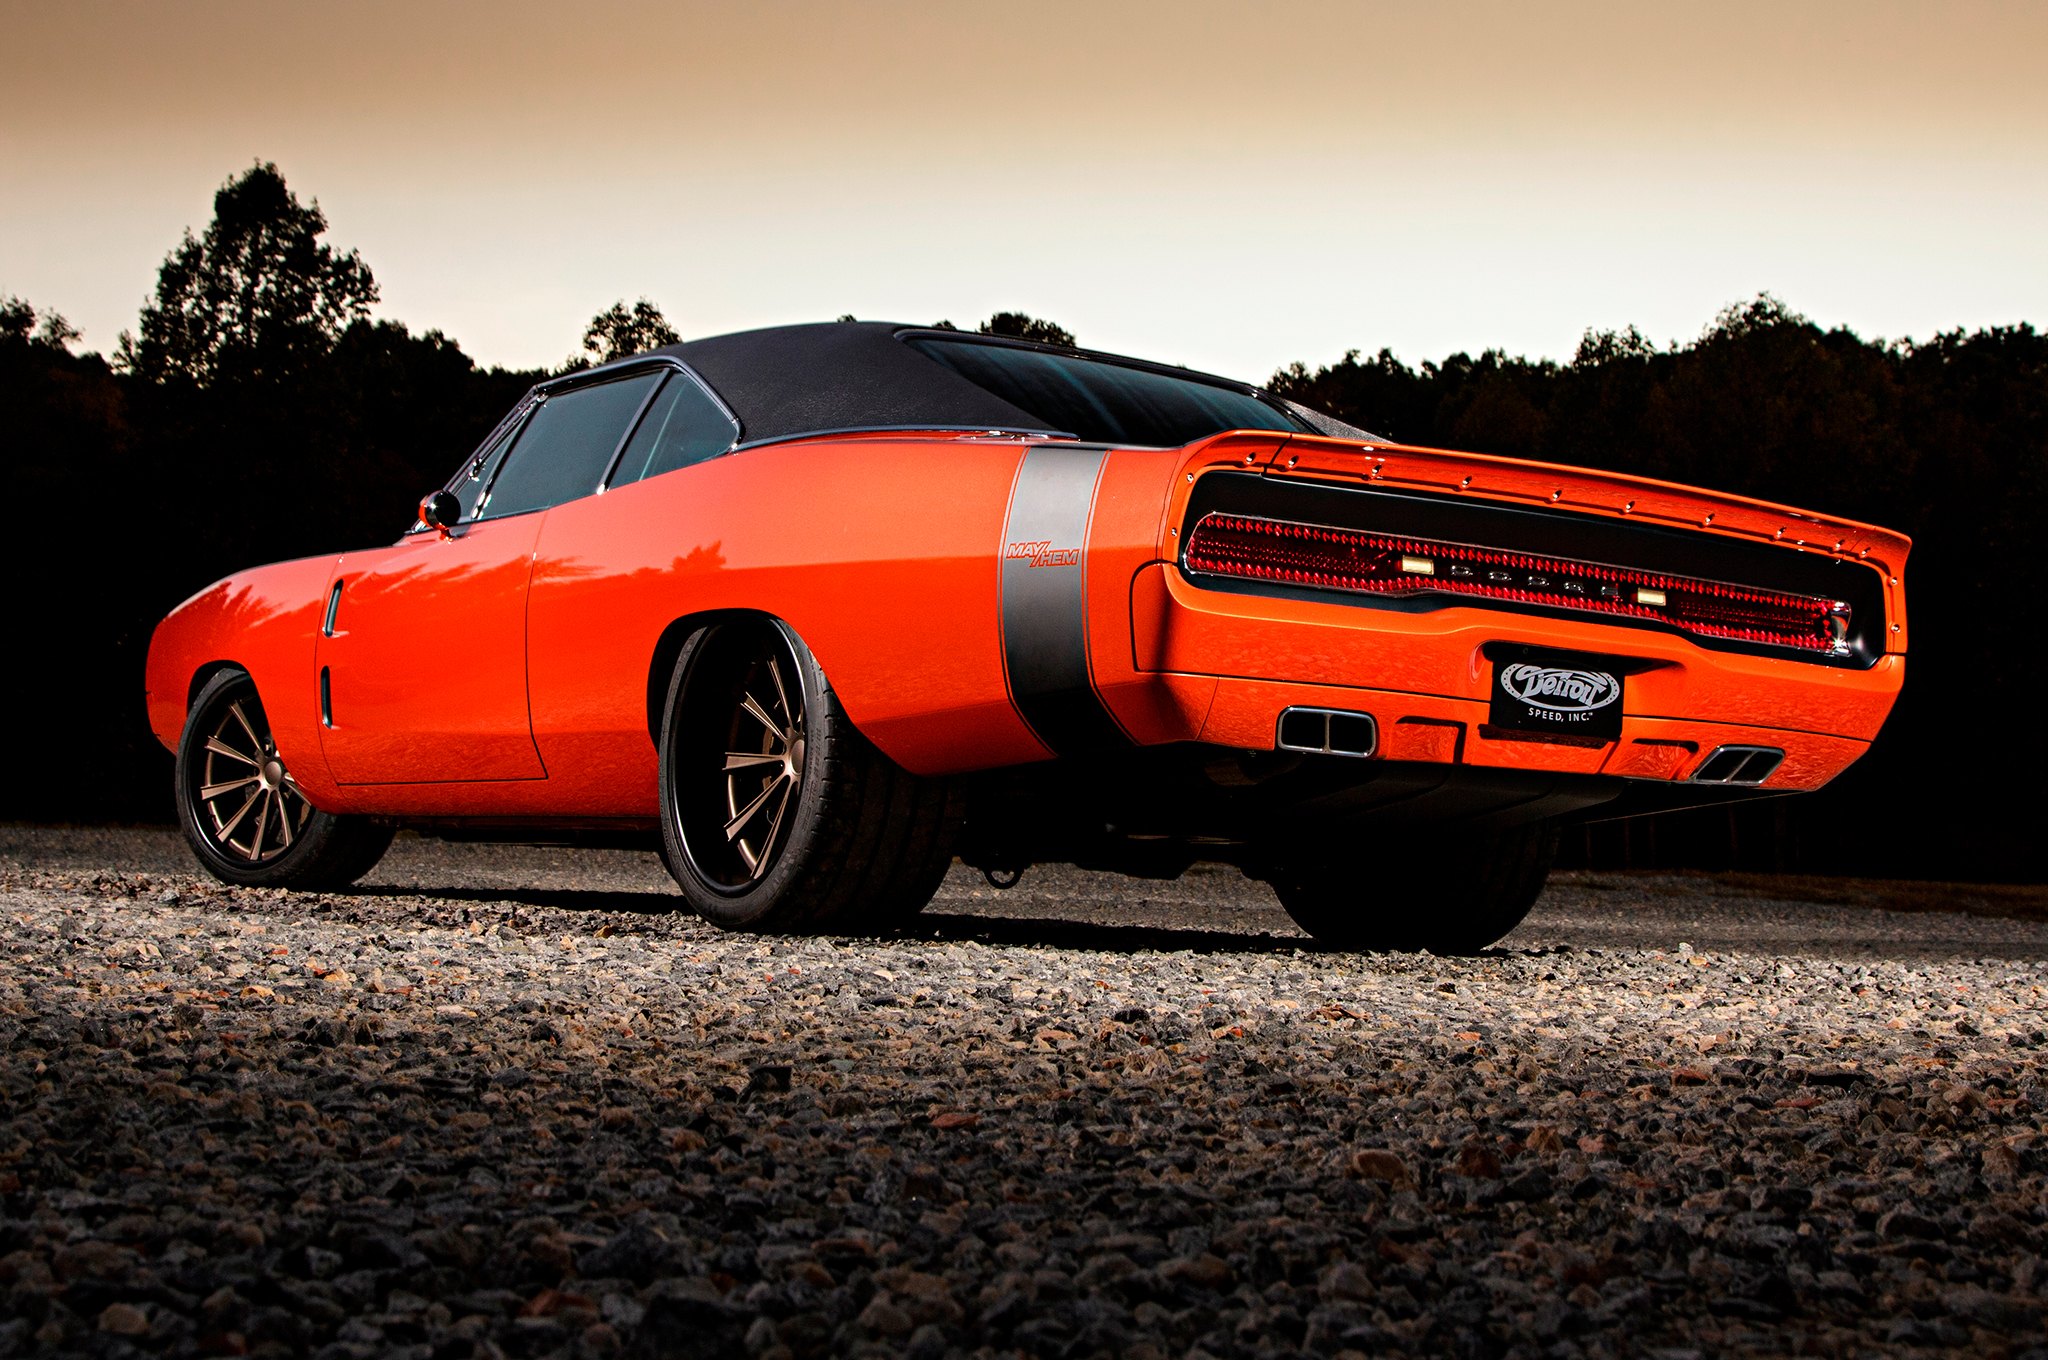 Aftermarket Rear Bumper on Red Dodge Charger - Photo by Forgeline Motorsports